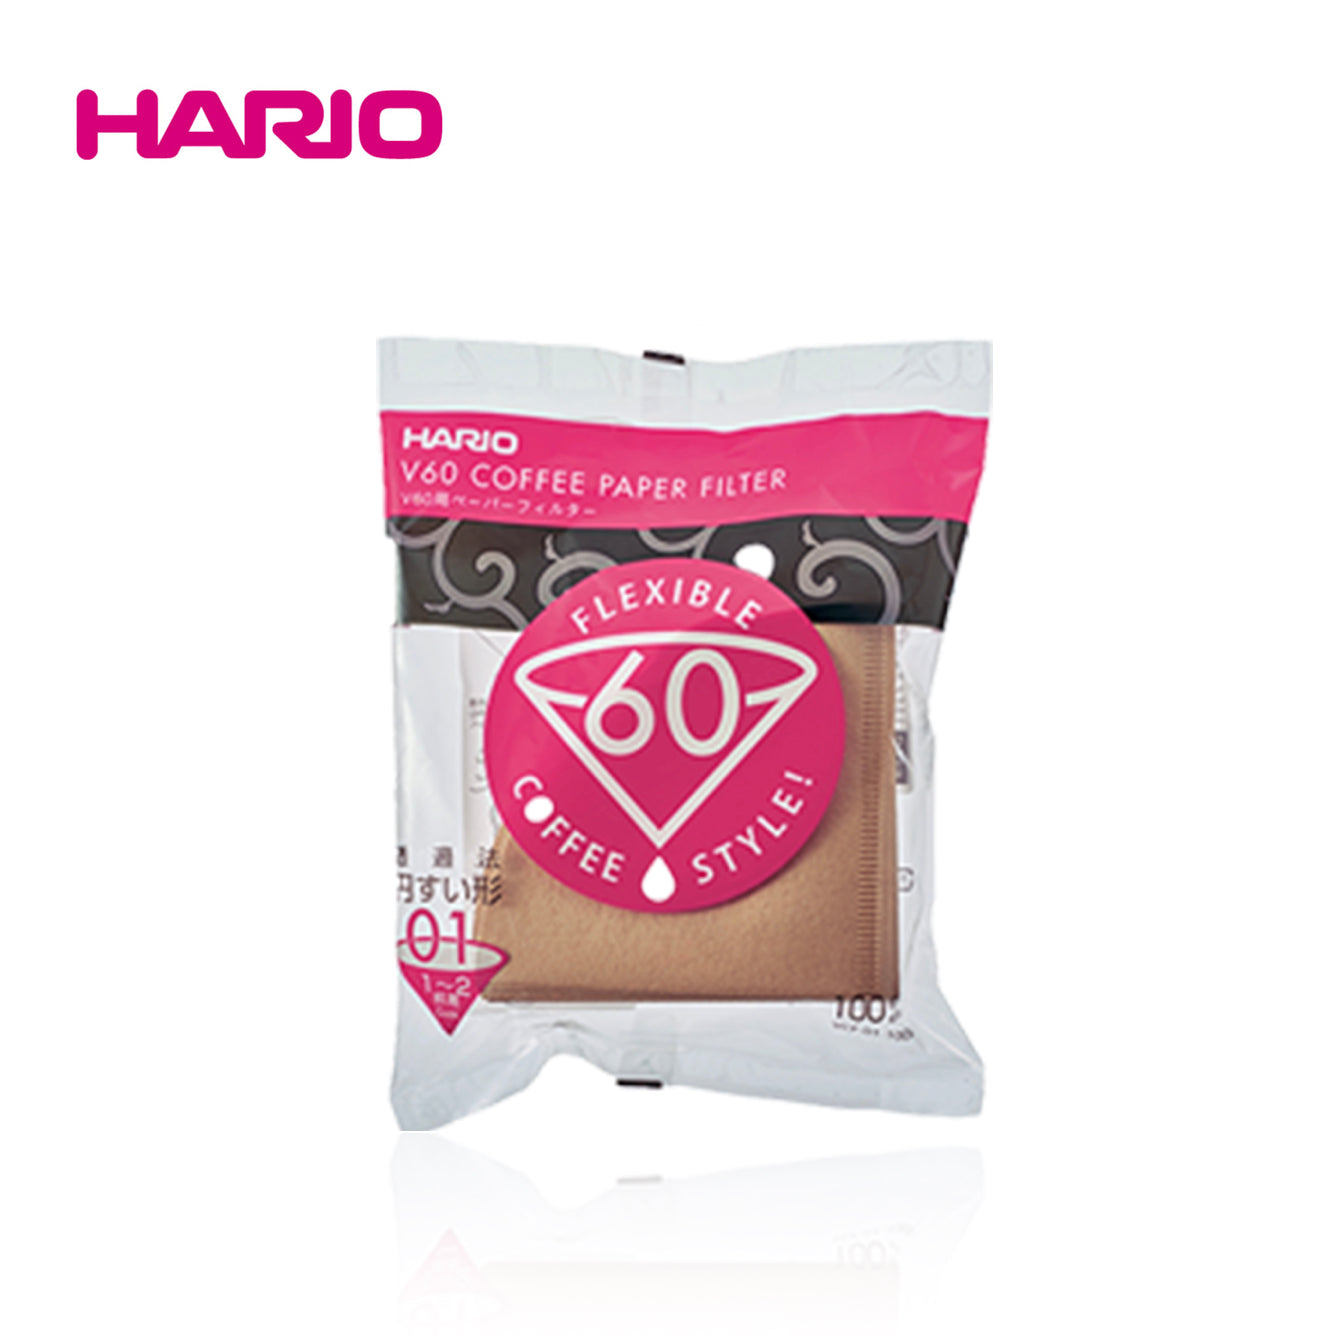 Hario V60 Coffee Paper Filter Size 1 brown